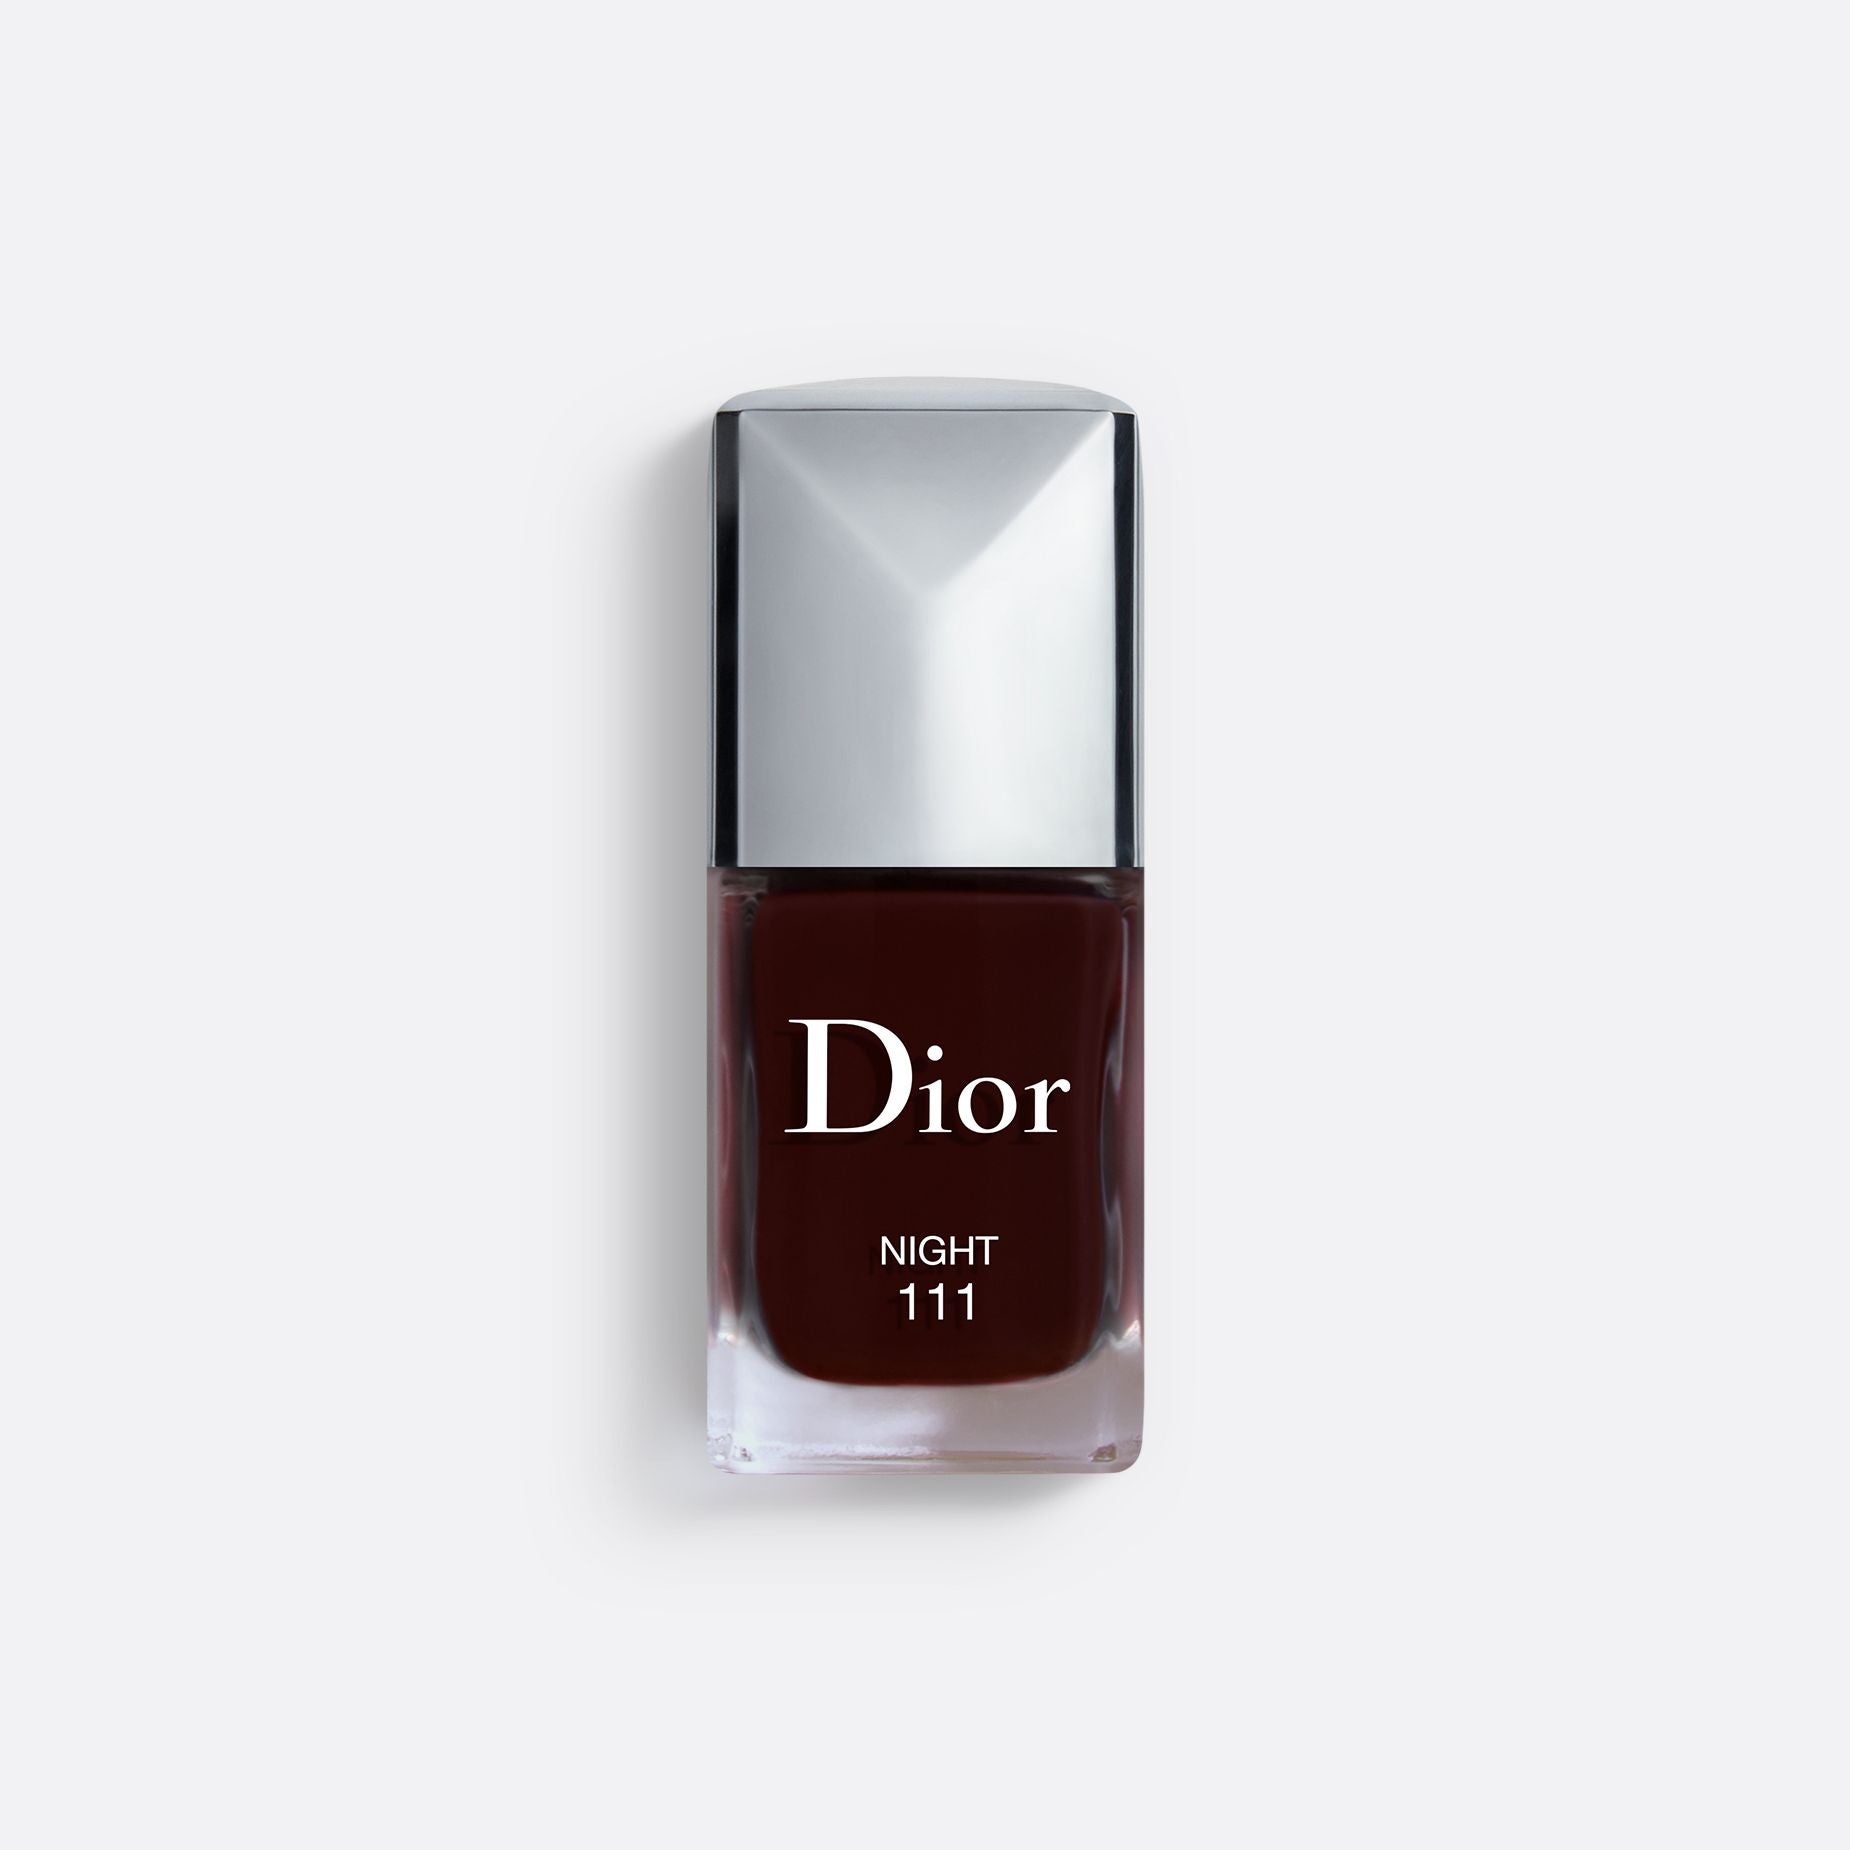 DIOR VERNIS ~ Nail Lacquer - Couture Color - Shine and Long Wear - Gel Effect - Protective Nail Care